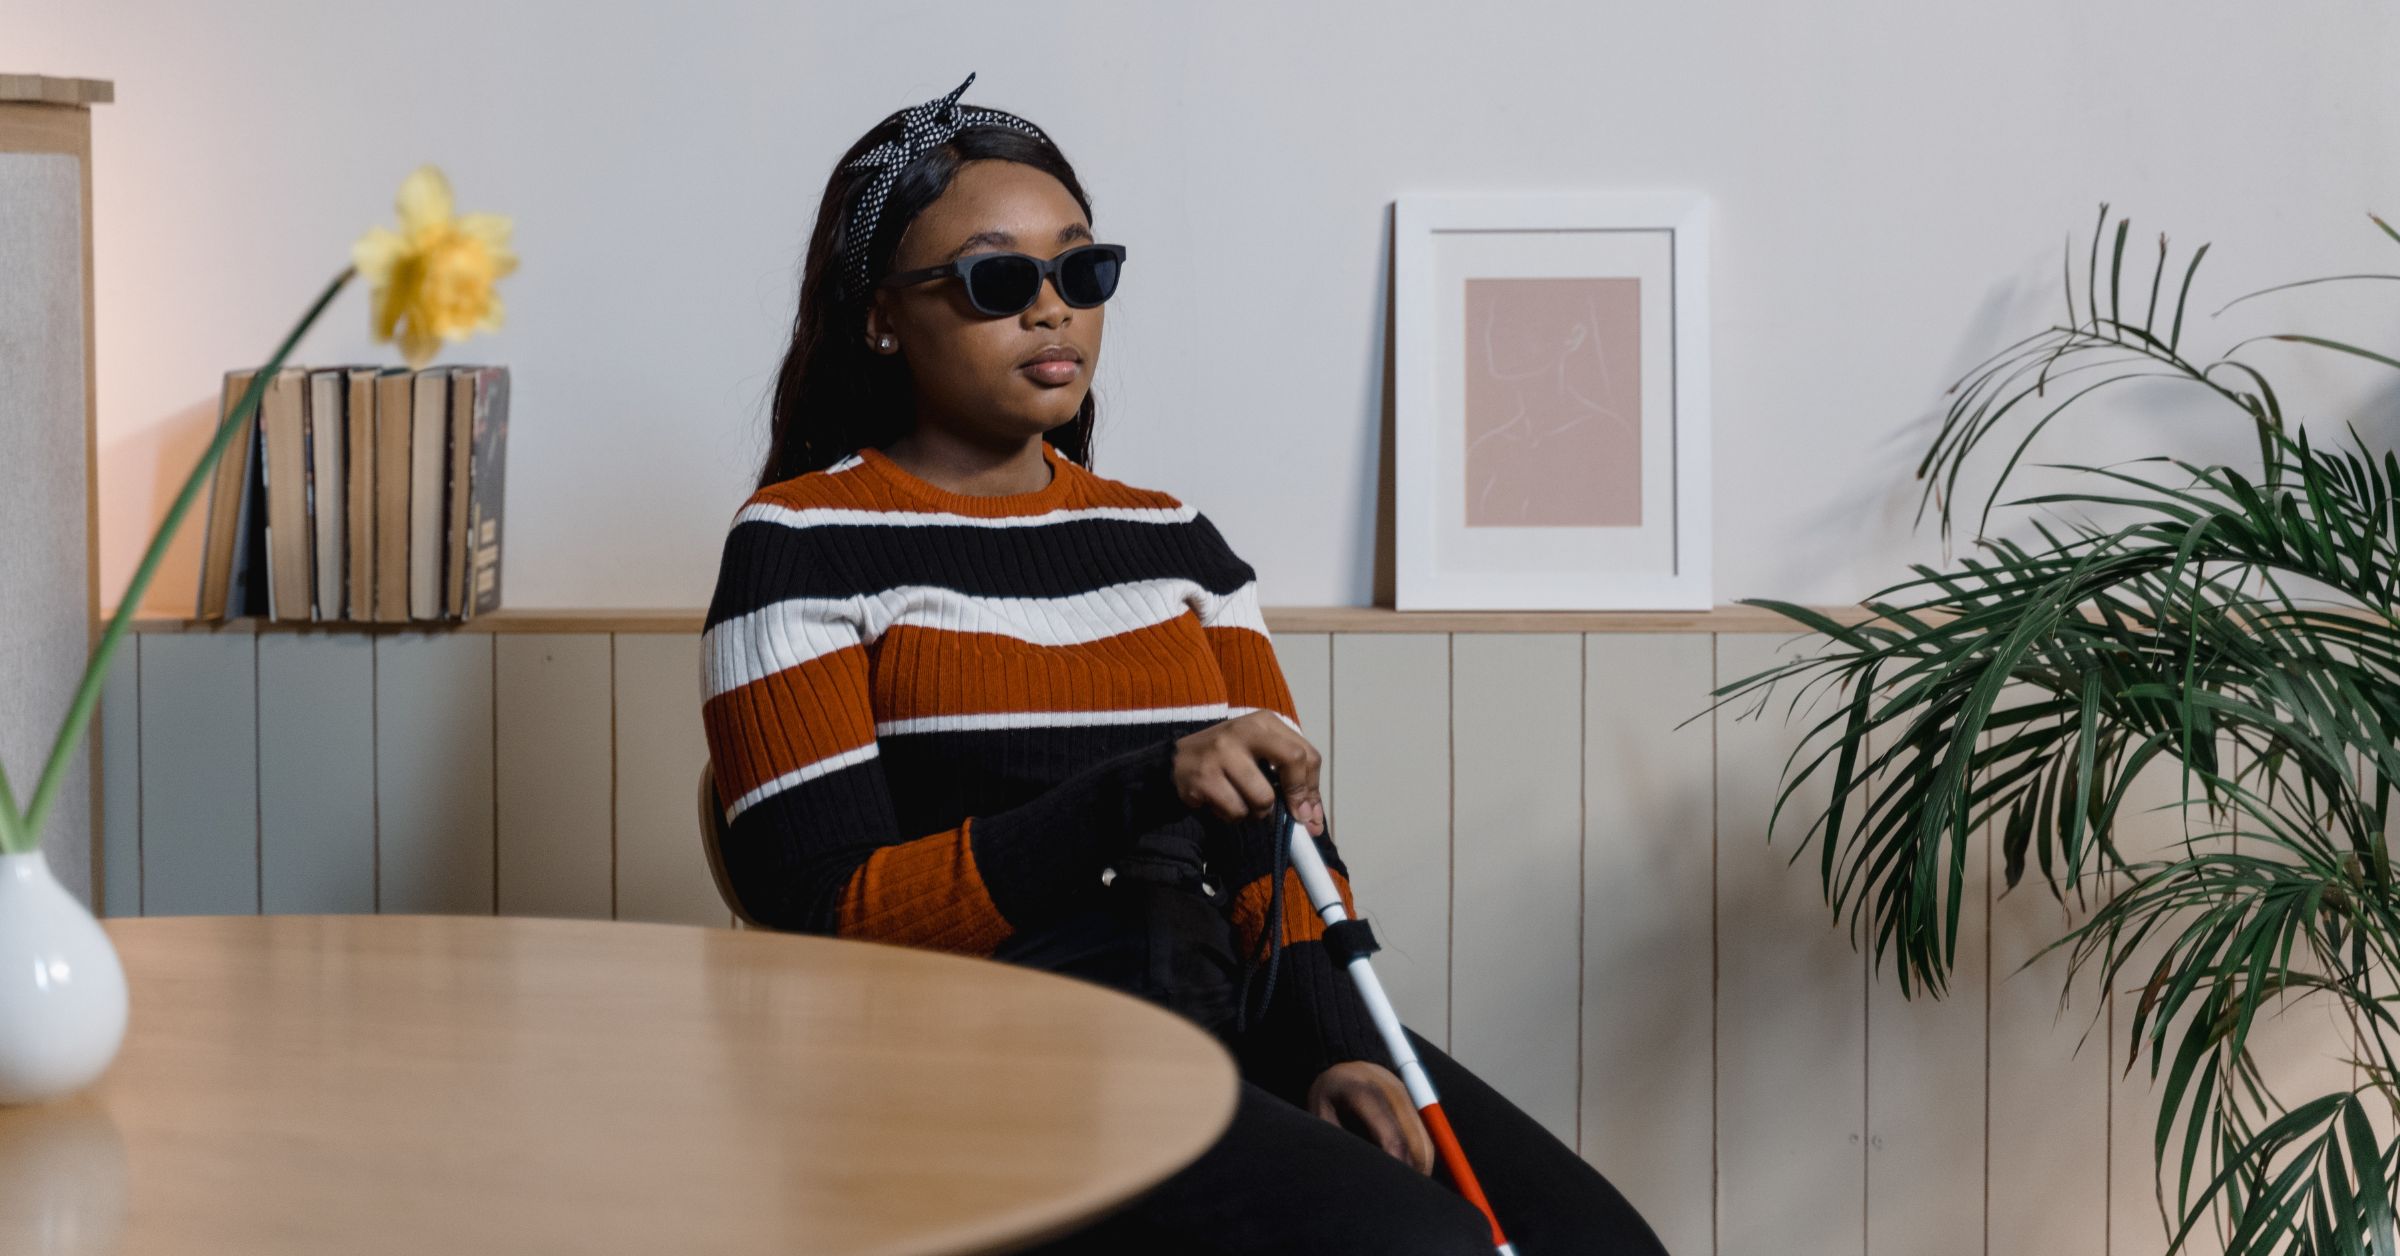 A young black woman wearing sunglasses and a black, brown and white striped wool jumper, sitting by a table holding a white cane. There are pot plants dotted around and an indistinct, framed pink picture on the wall.